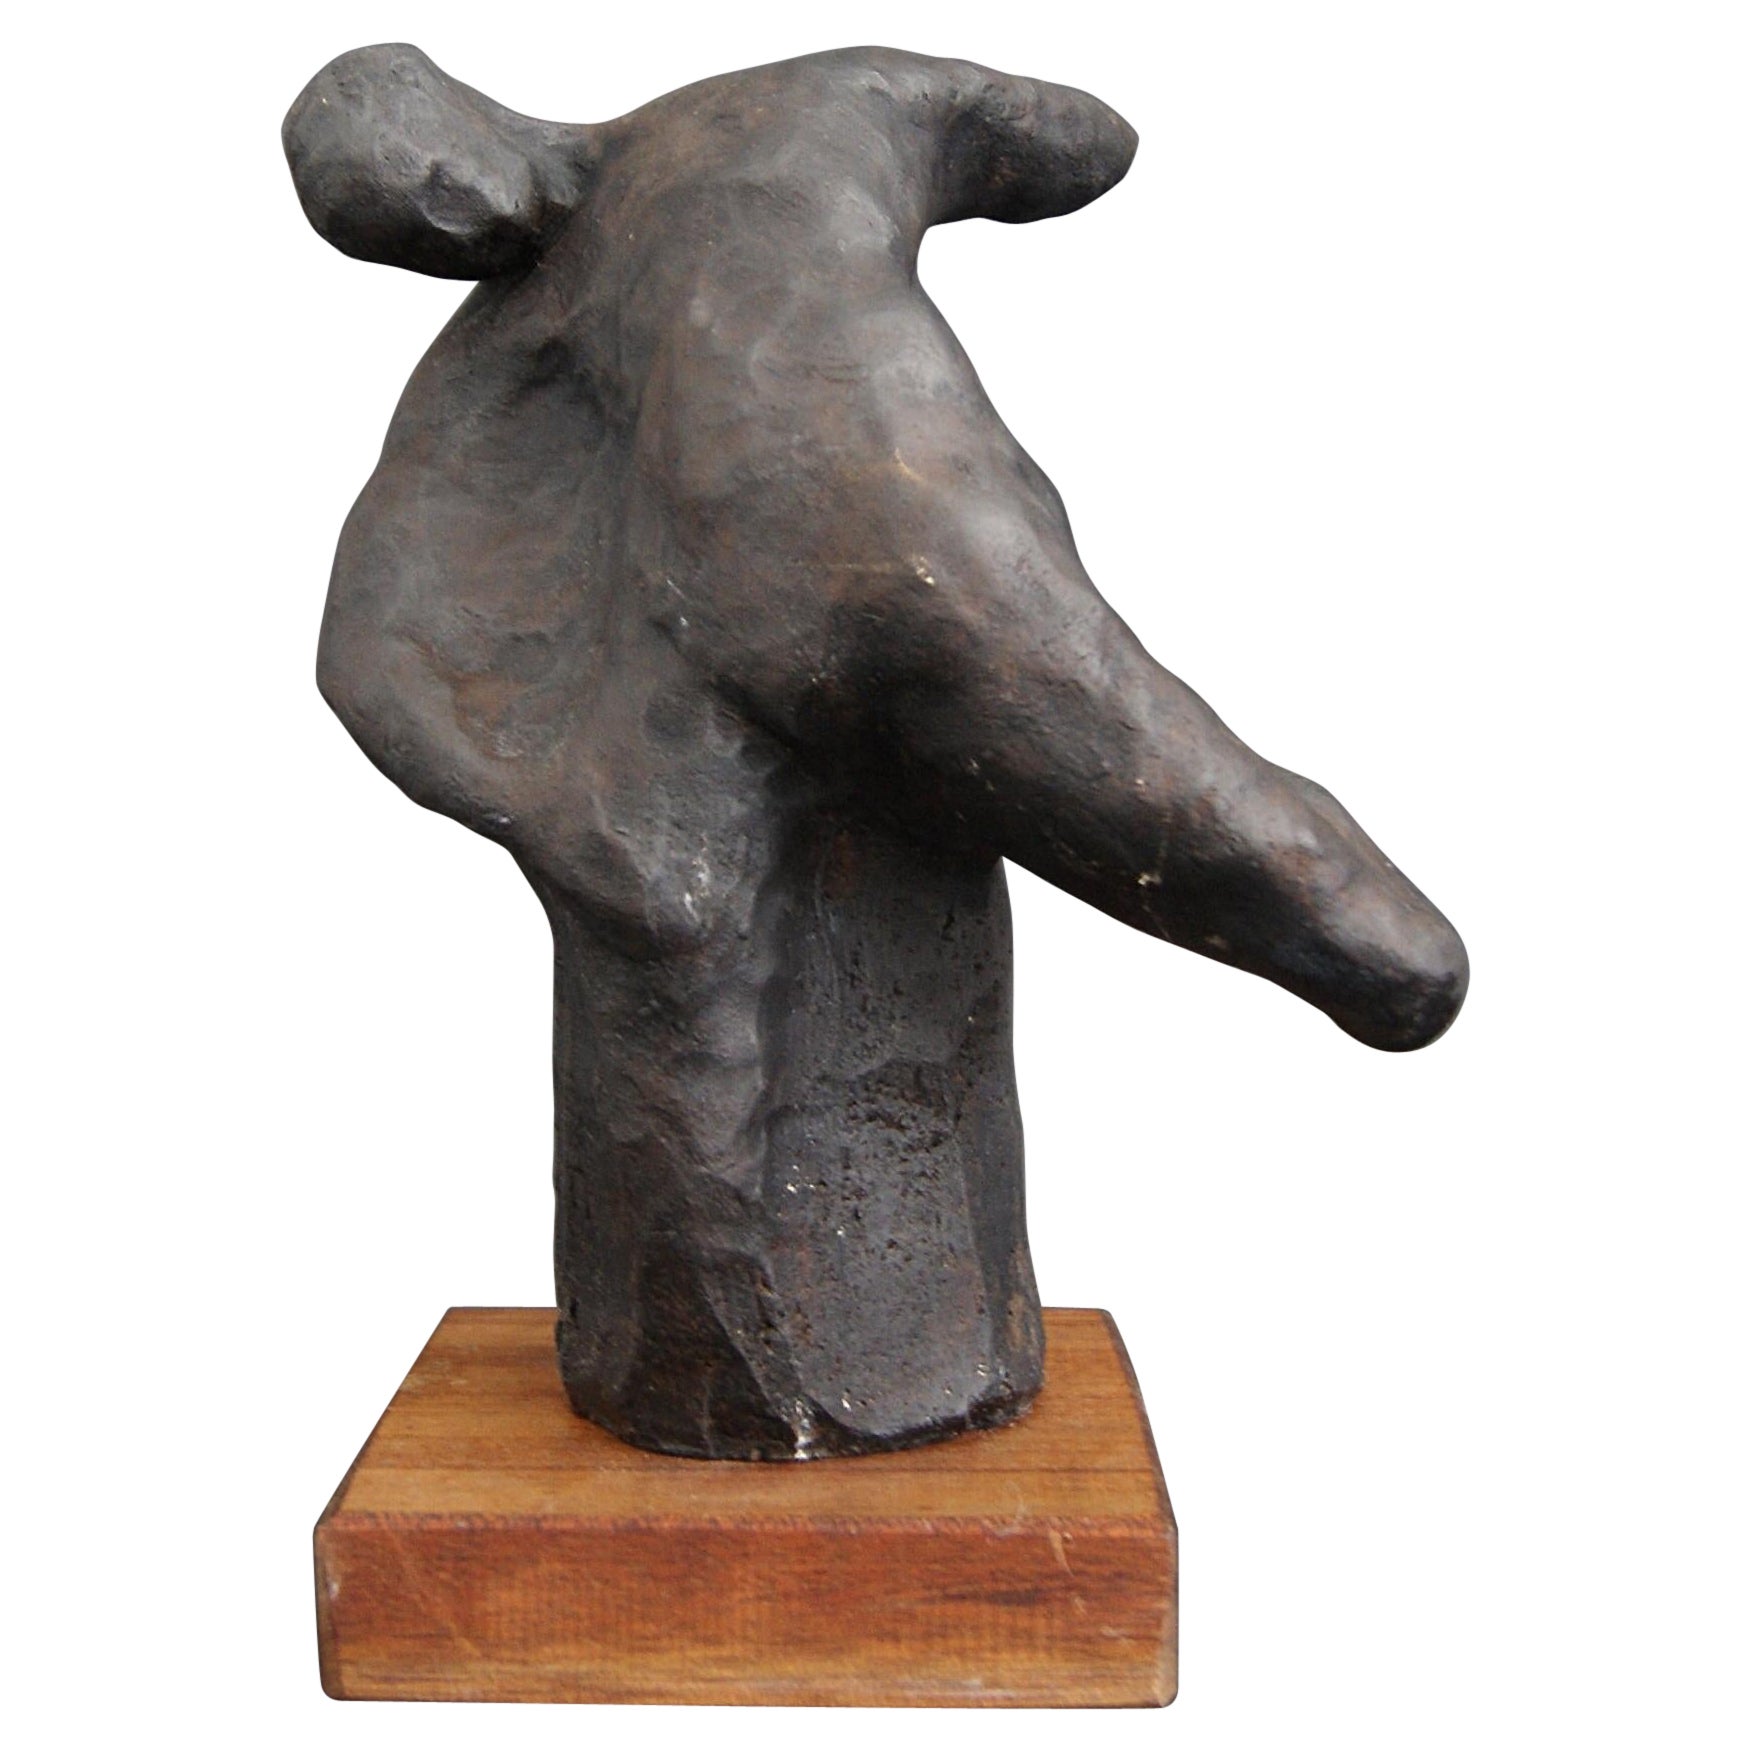 Artist Plaster Sculpture Bronze Patina on a Wooden Base, Abstract Art For Sale